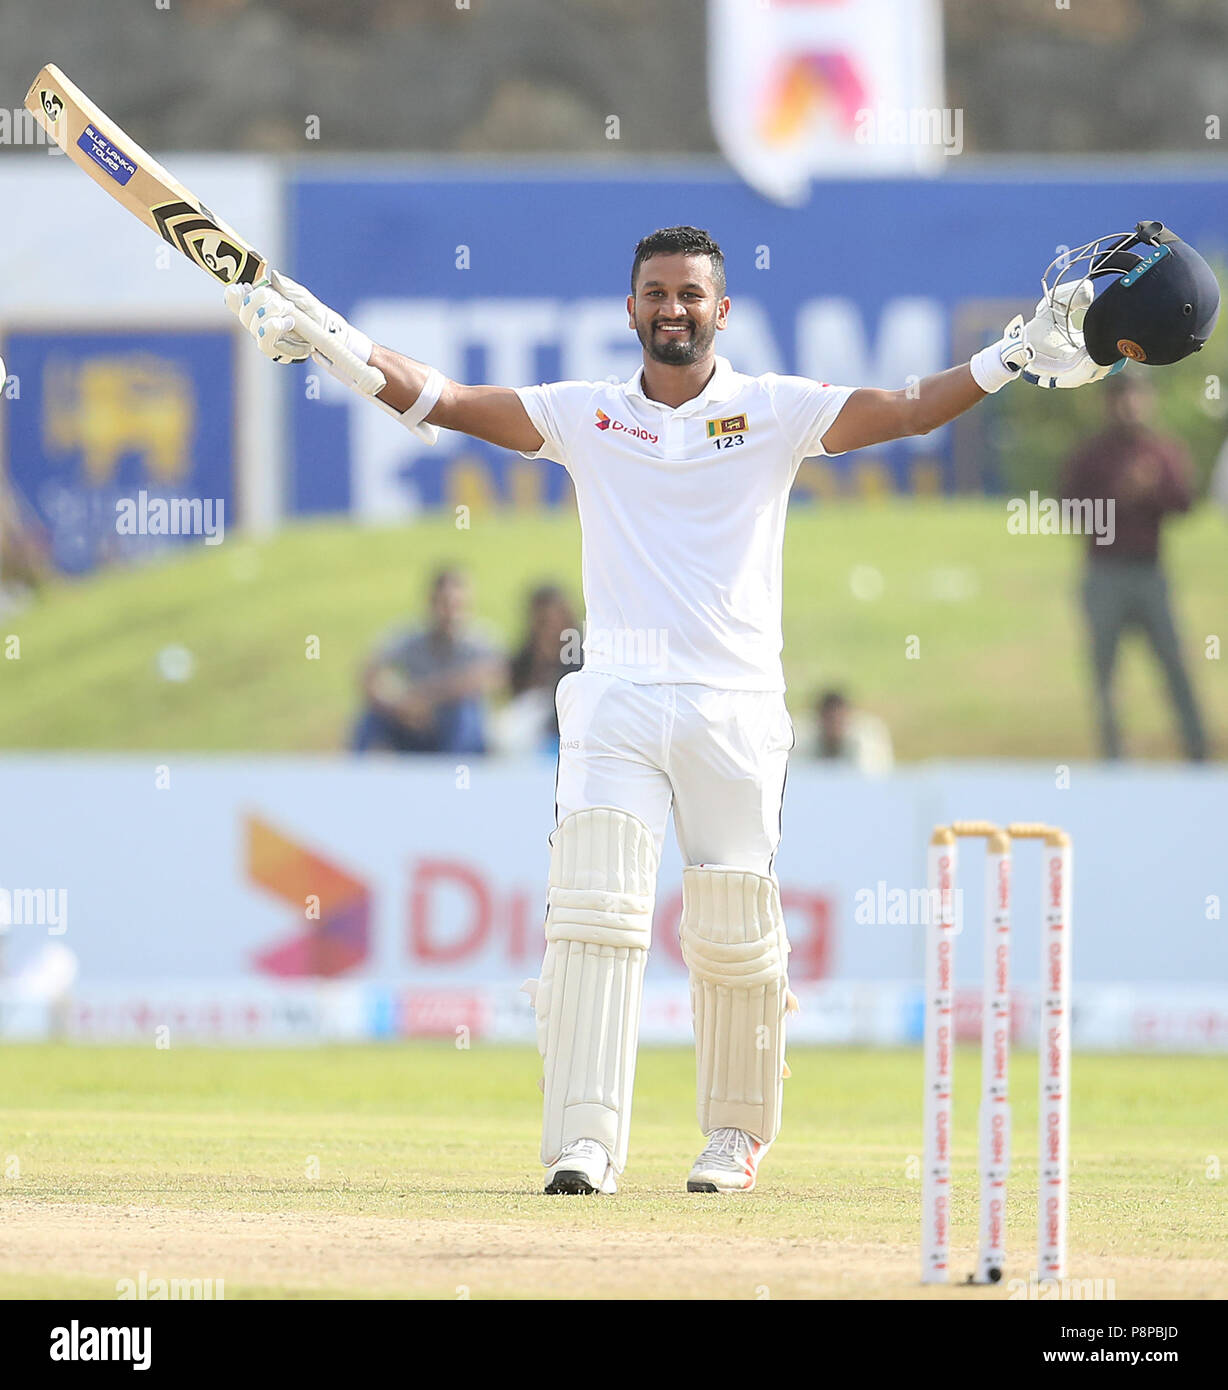 Sri Lankan cricketer Dimuth Karunaratne raises his bat and helmet in celebration after scoring a century (100 runs) during the first day of the opening Test match between Sri Lanka and South Africa at the Galle International Cricket Stadium in Galle on July 12, 2018 (Photo by Lahiru Harshana / Pacific Press) Stock Photo